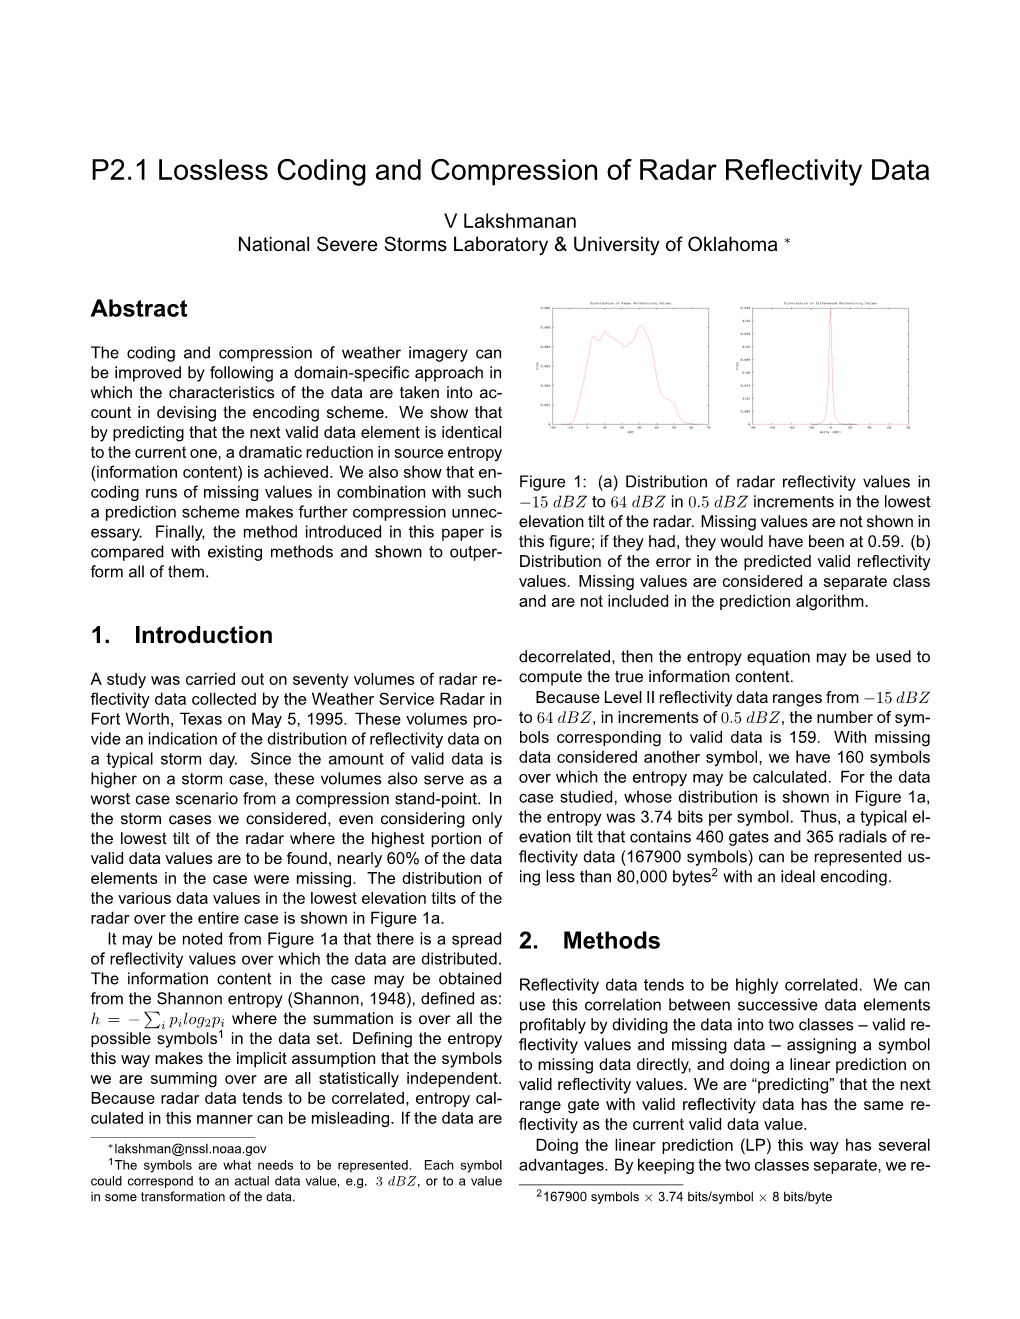 P2.1 Lossless Coding and Compression of Radar Reflectivity Data